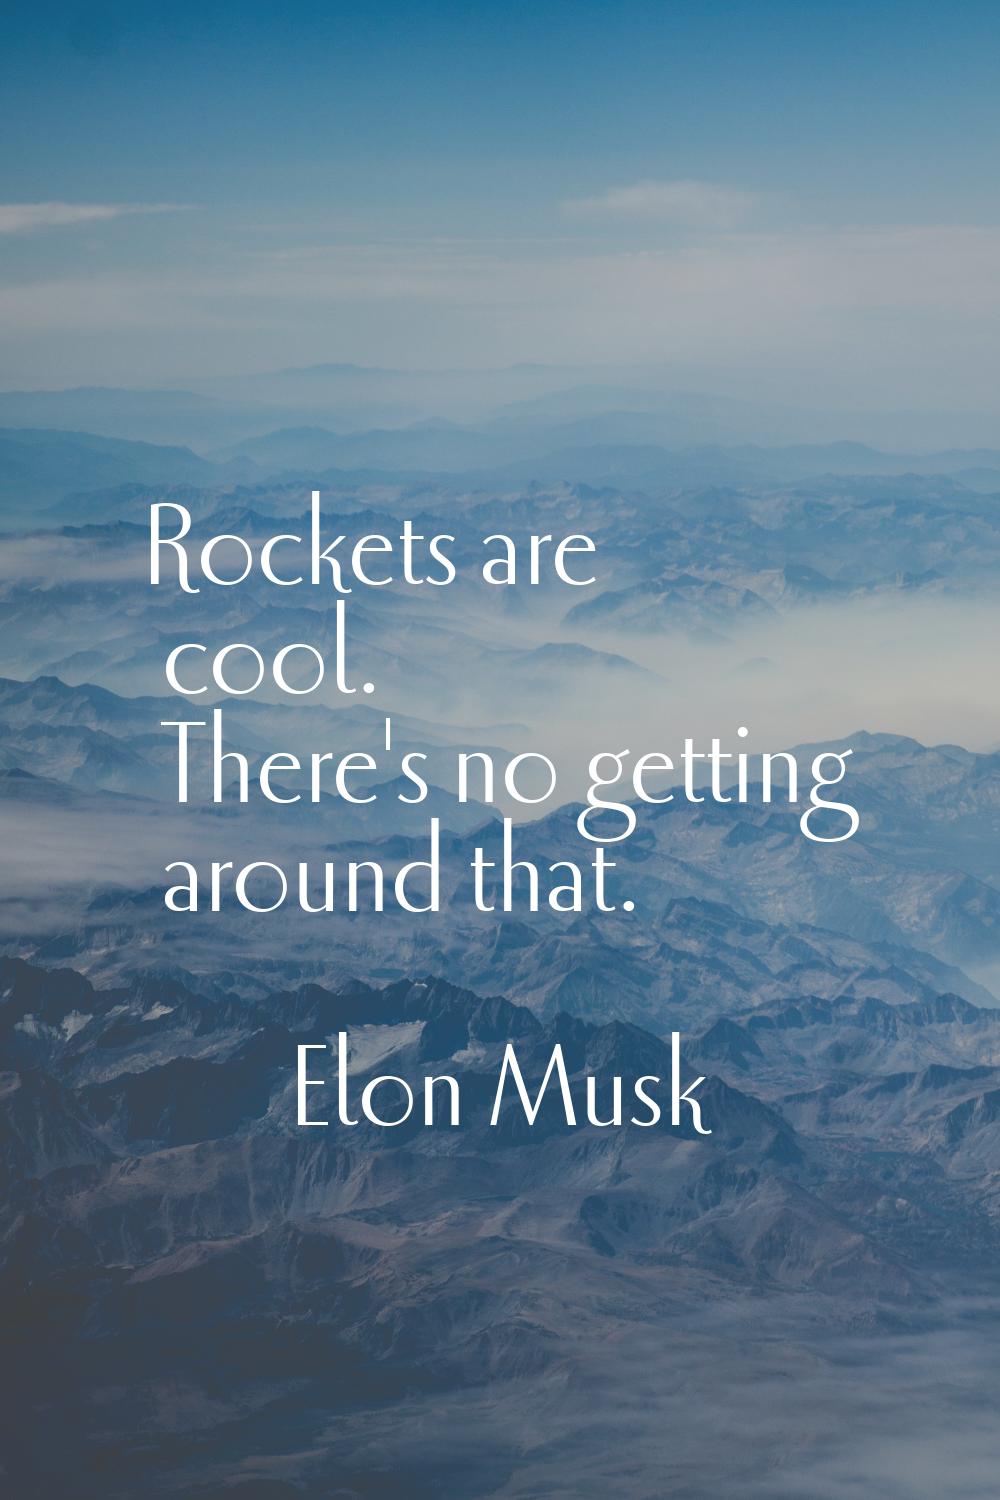 Rockets are cool. There's no getting around that.